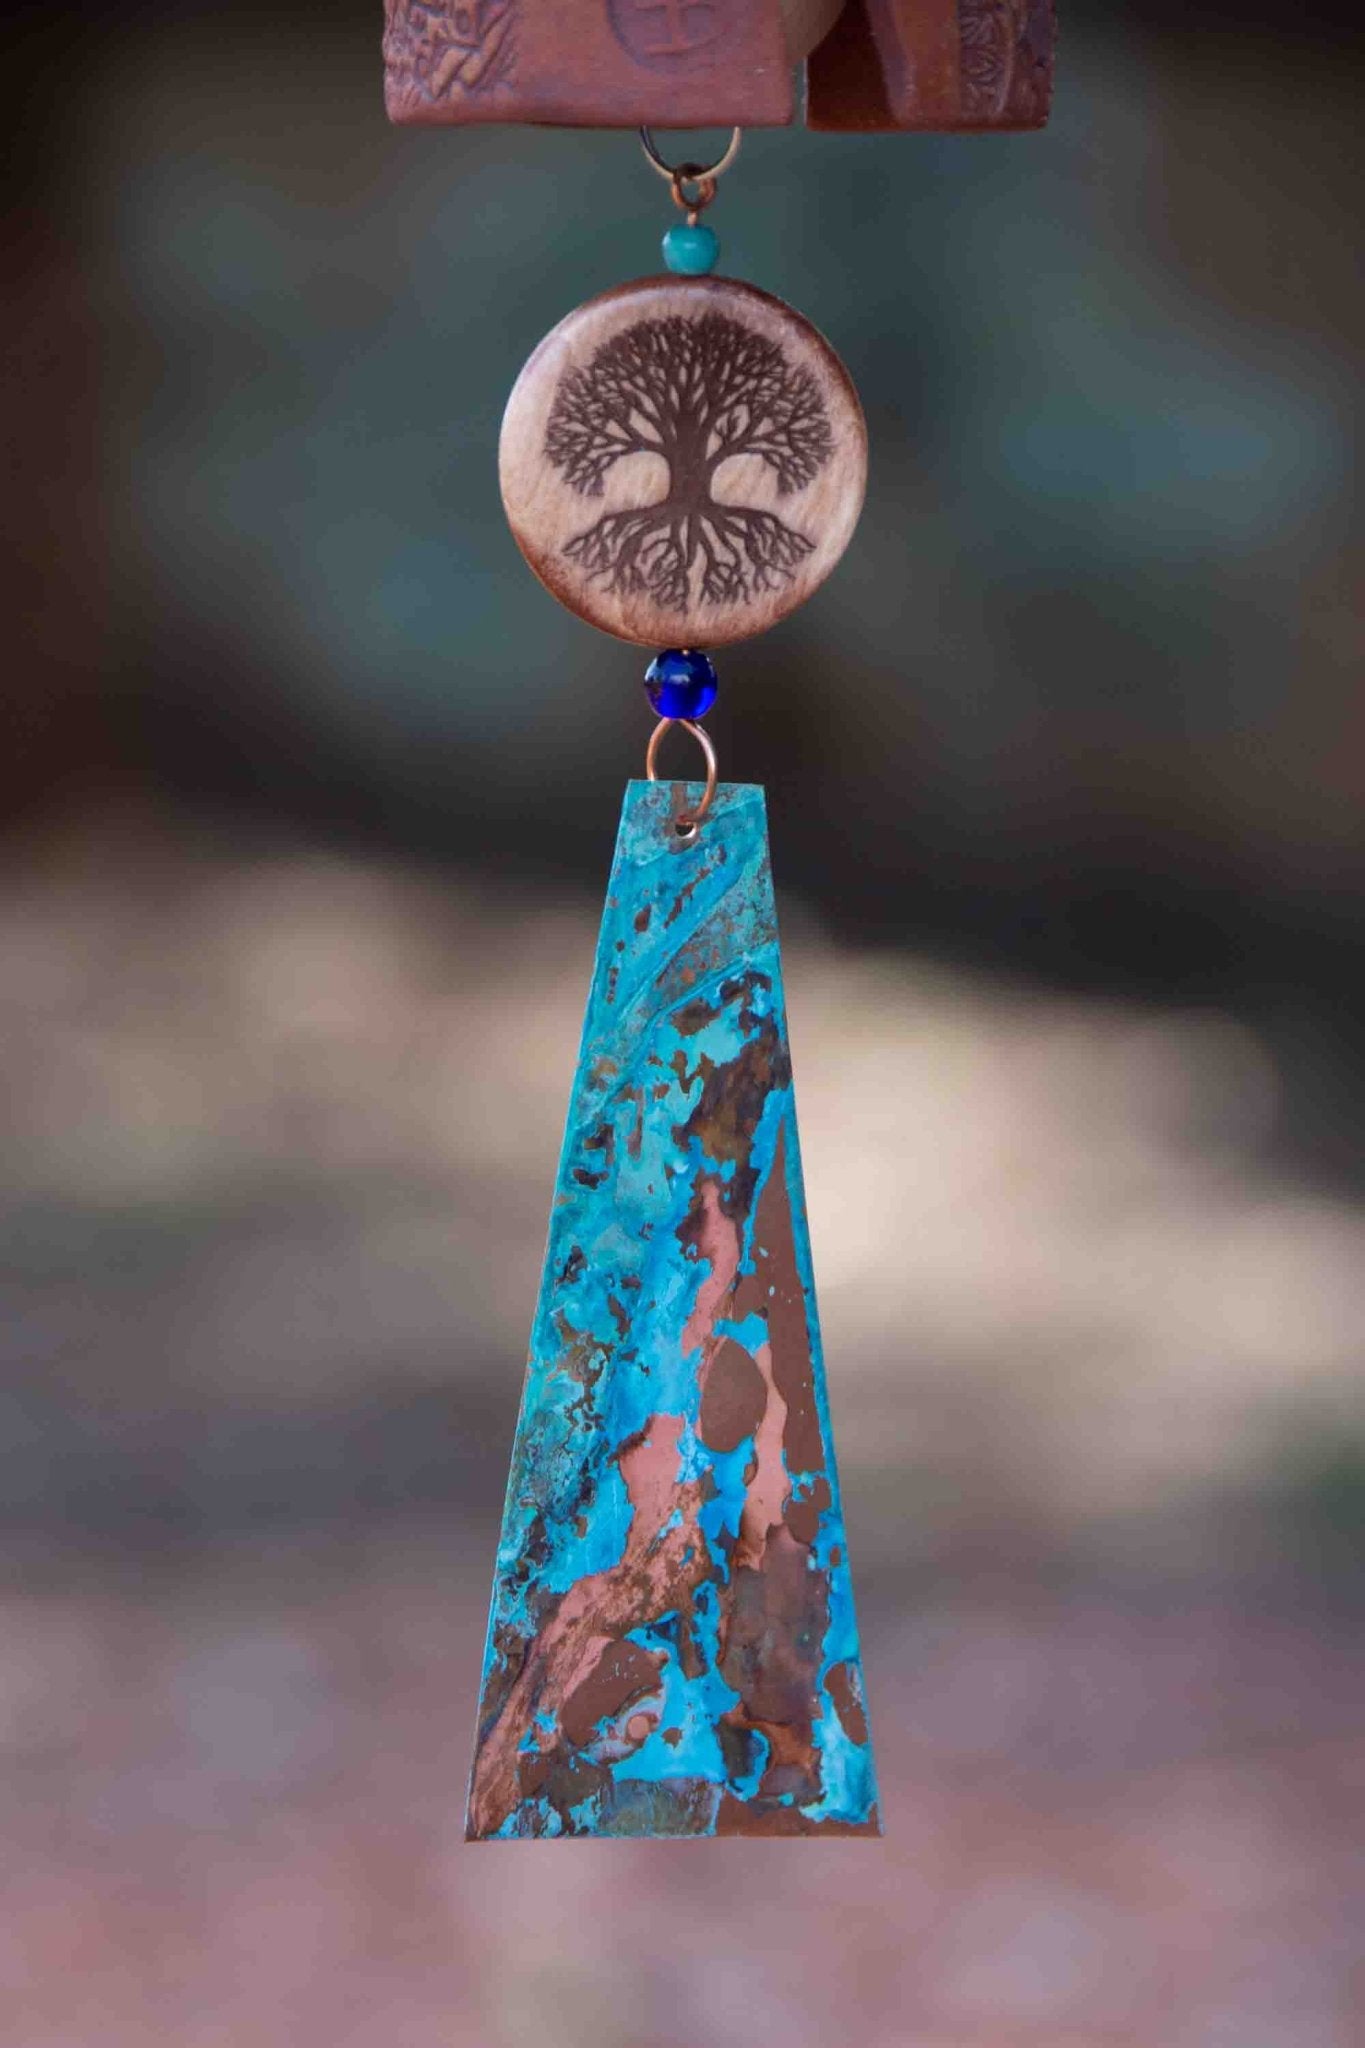 Sympathy Gift of Wind Chimes with Copper Sail - EarthWind Bells